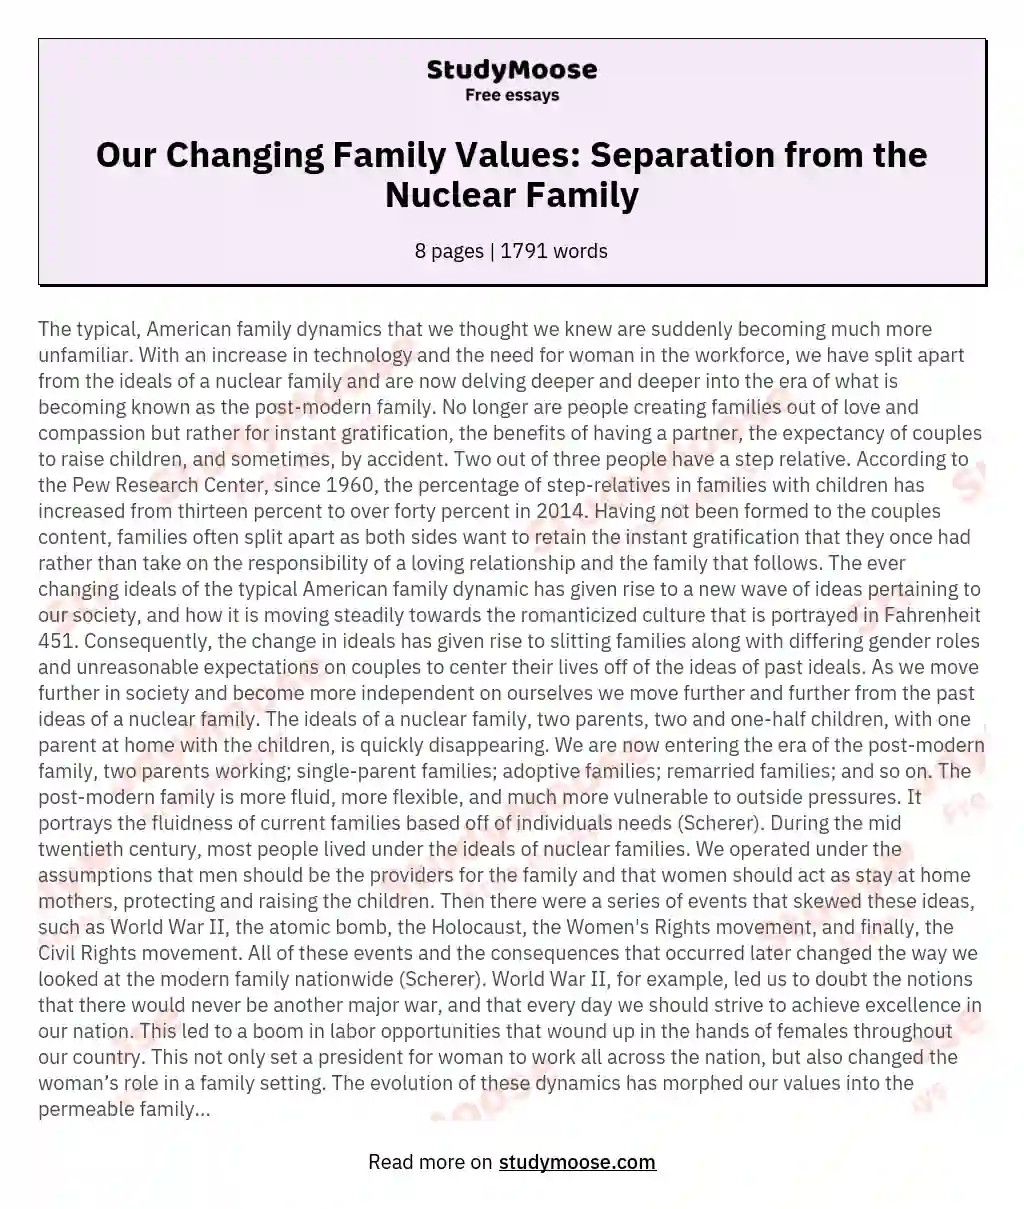 Our Changing Family Values: Separation from the Nuclear Family essay